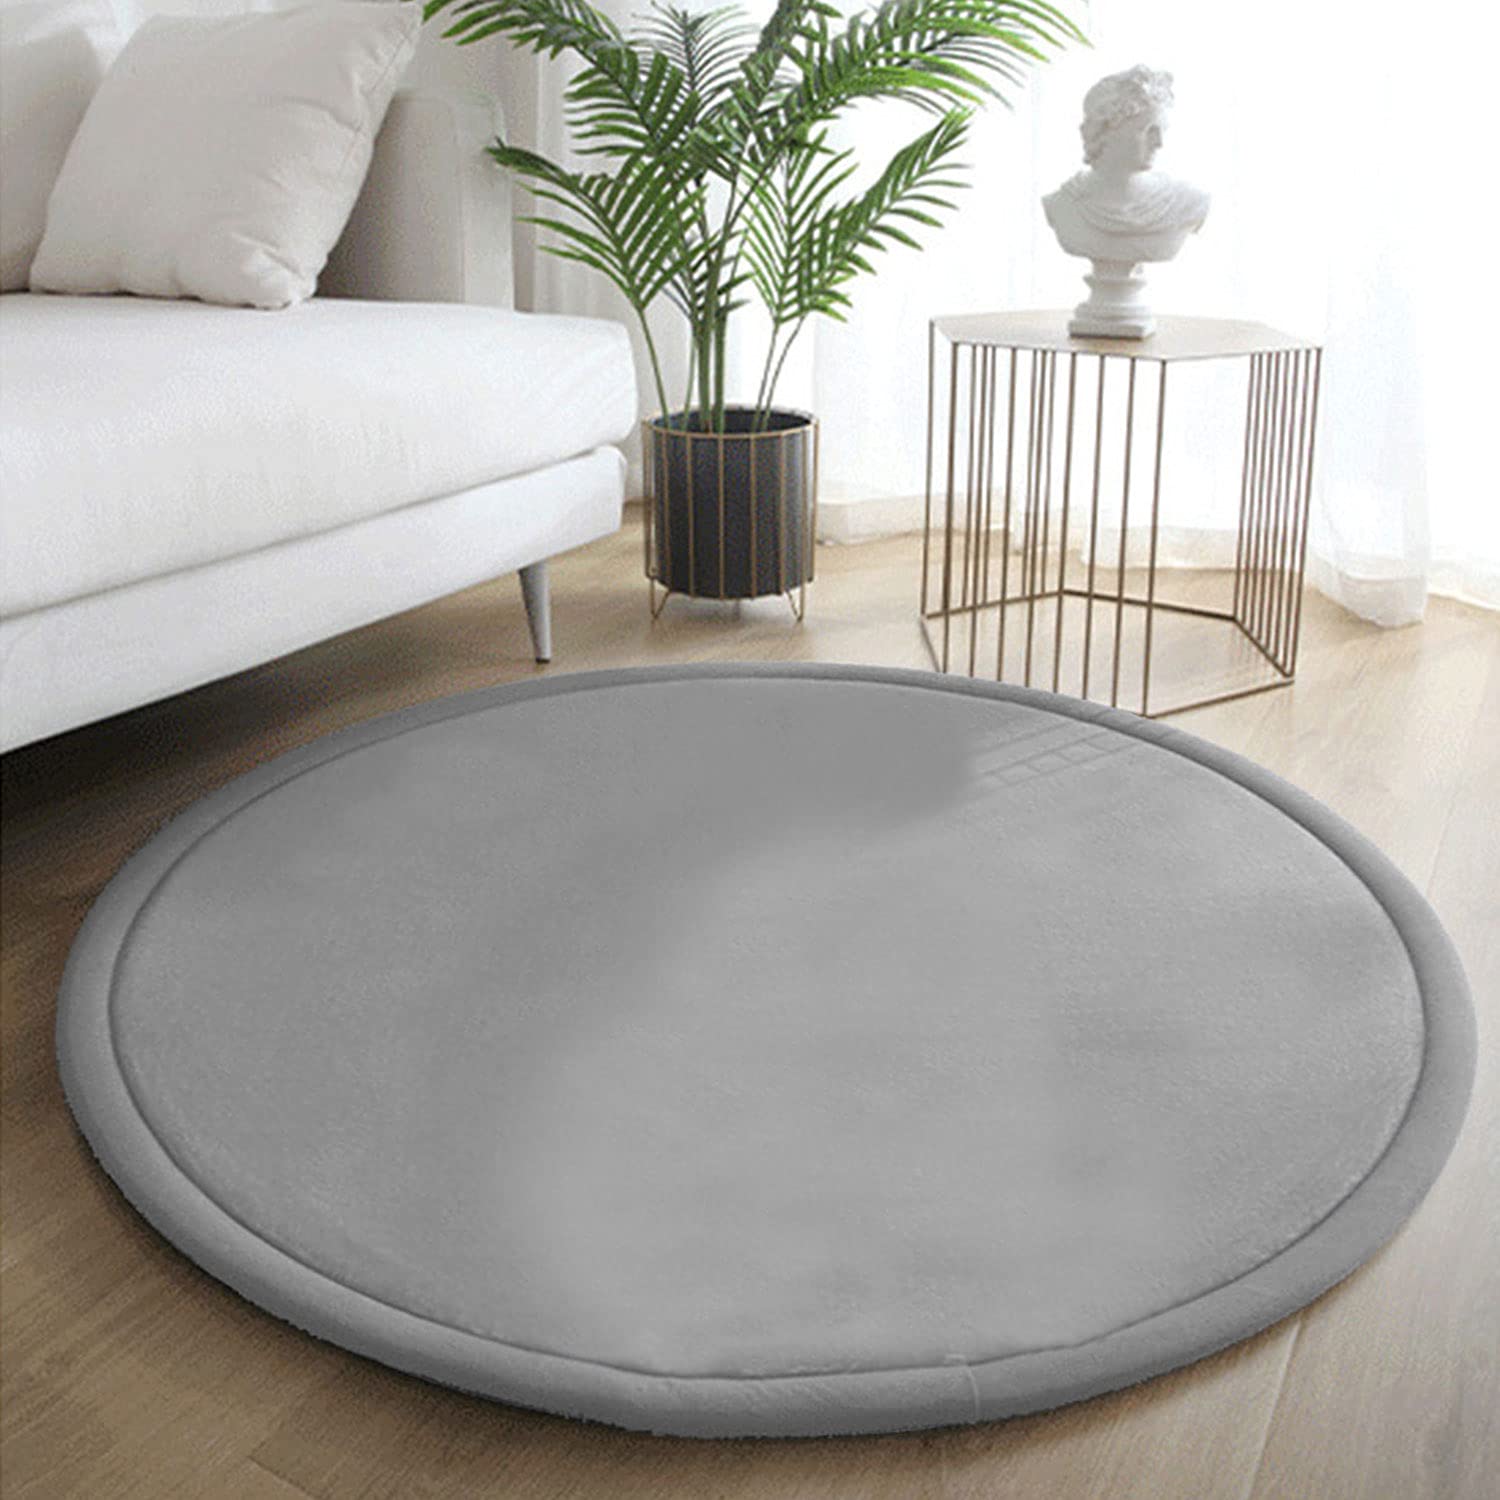 Thick Kids Round Rug – Coral Velvet Area ...